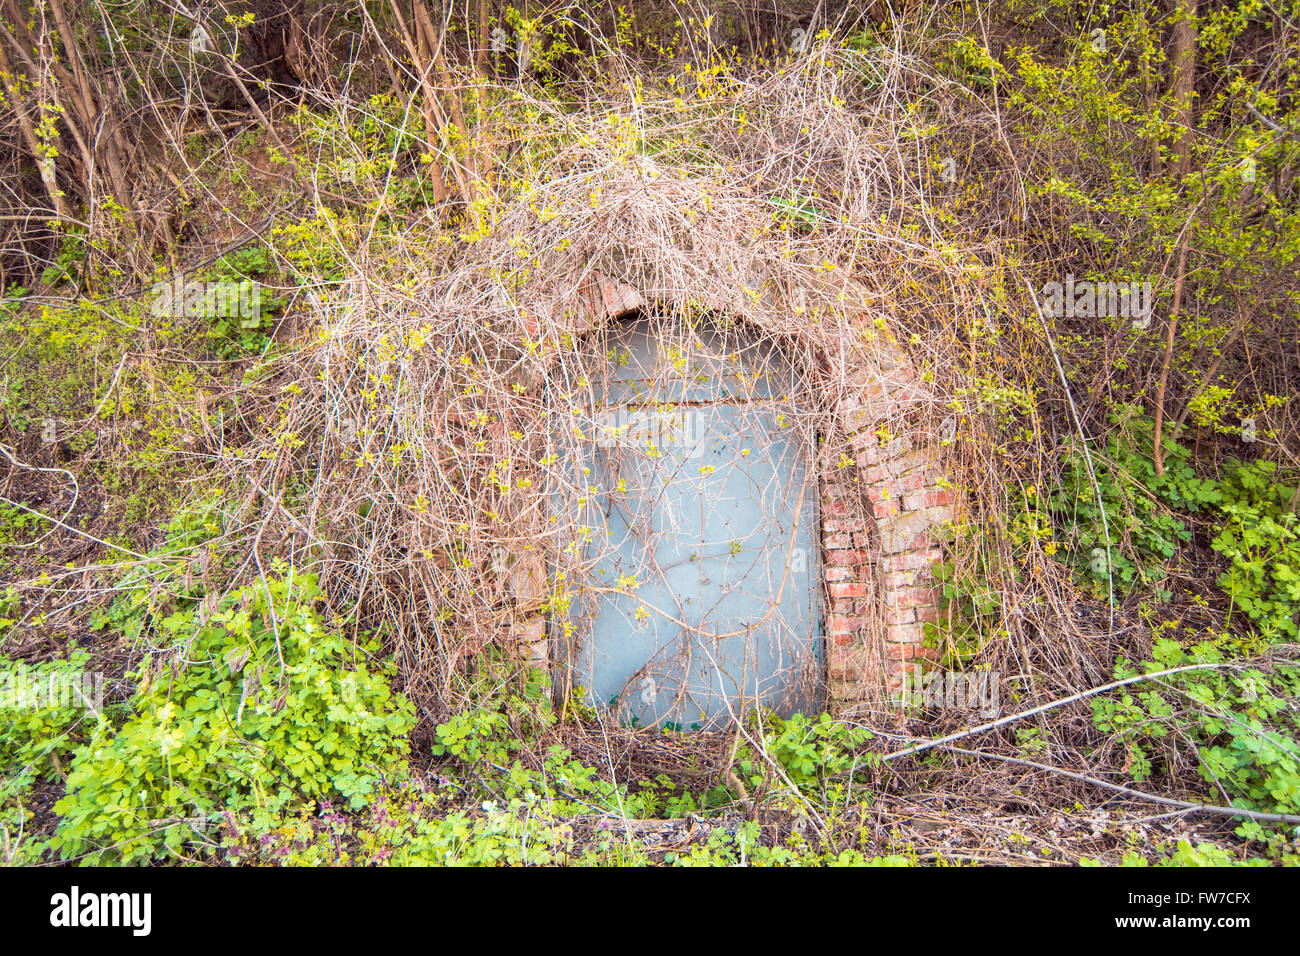 A secret door covered with grass. It inspires mystic look and make people wonder what stands behind it. Stock Photo